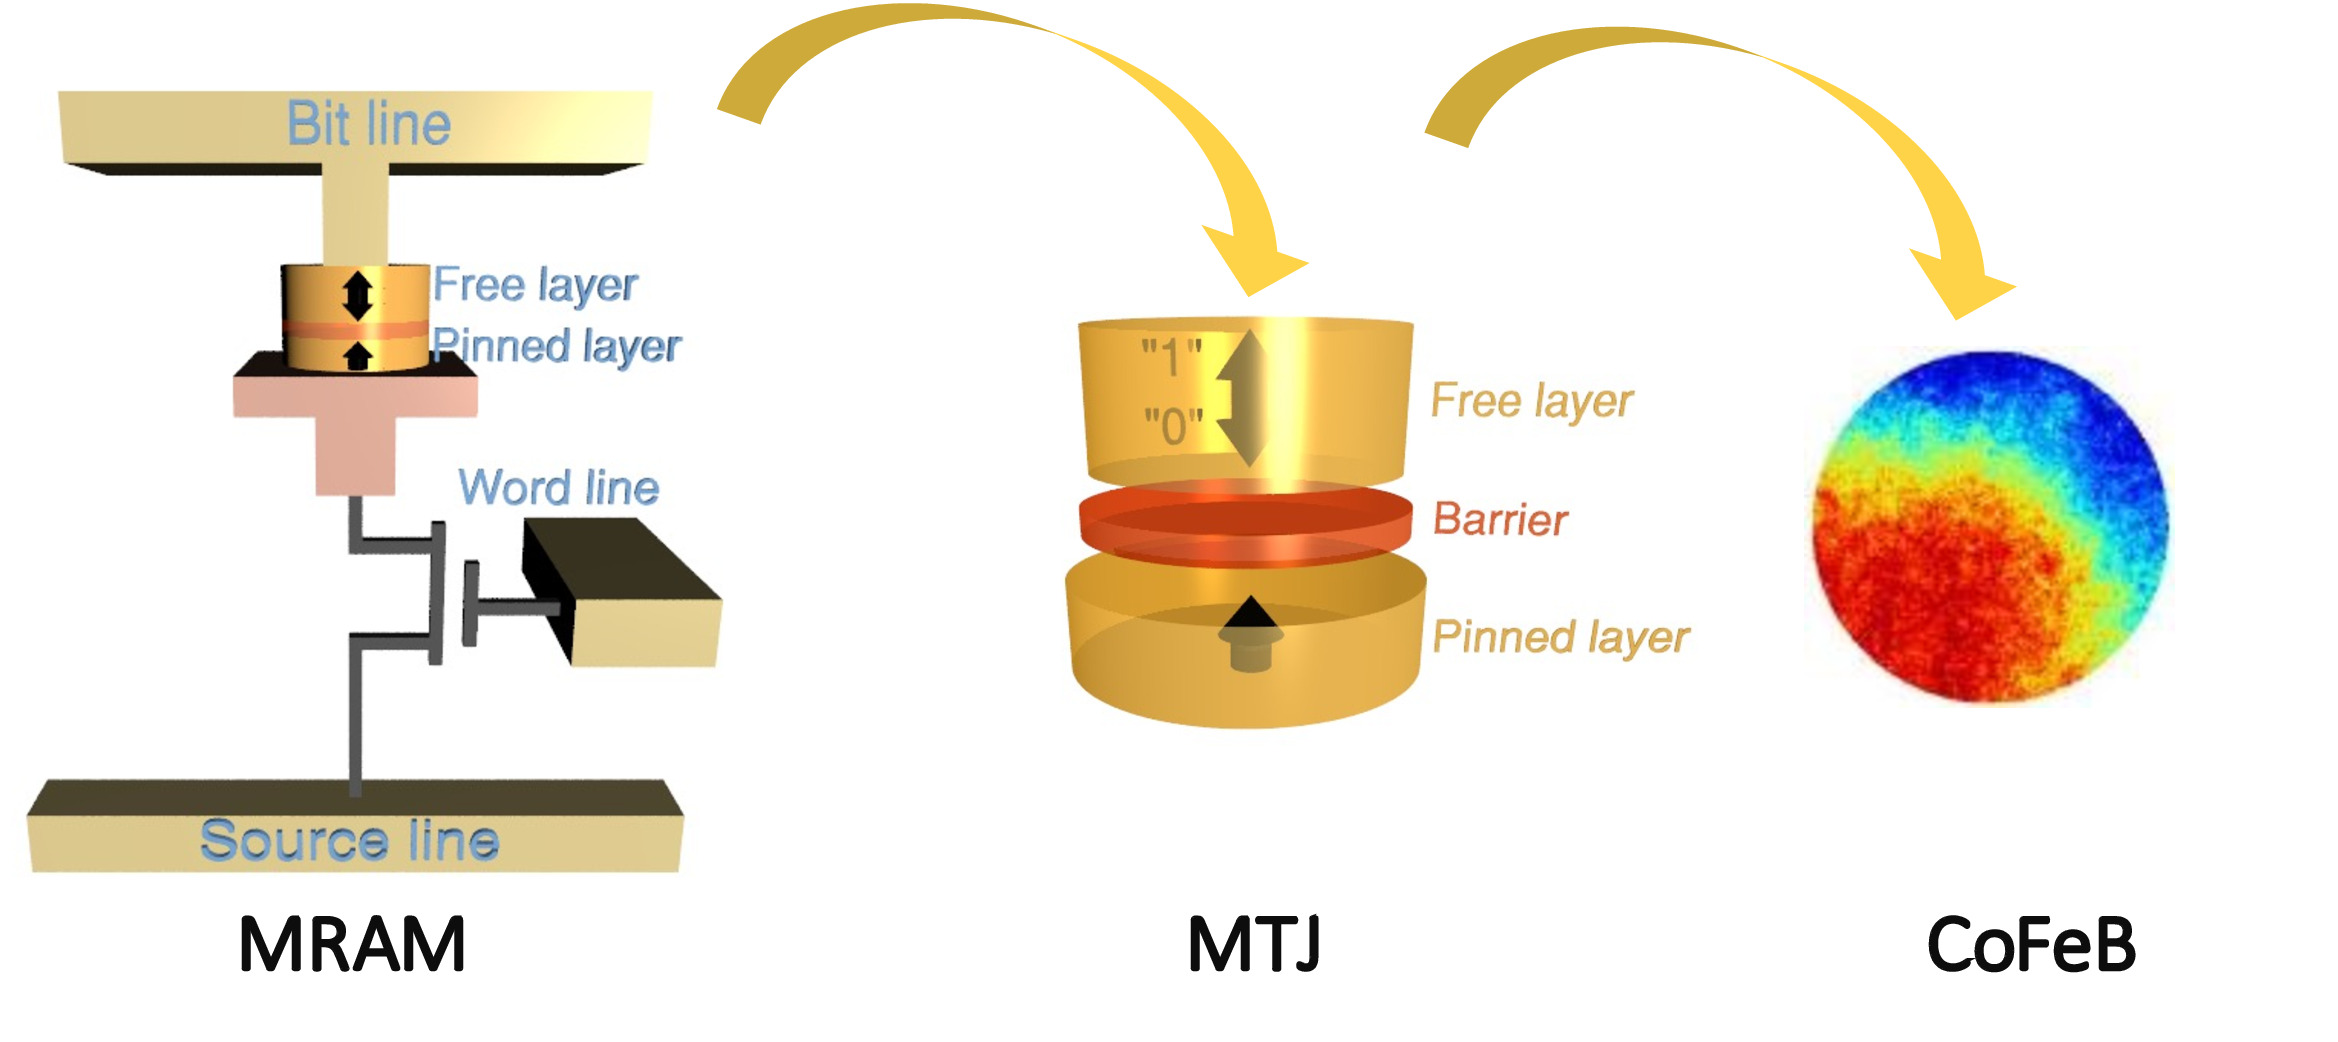  Sketch of MRAM, MTJ and snaphsot showing switching of CoFeB free layer of the MTJ composing the MRM.